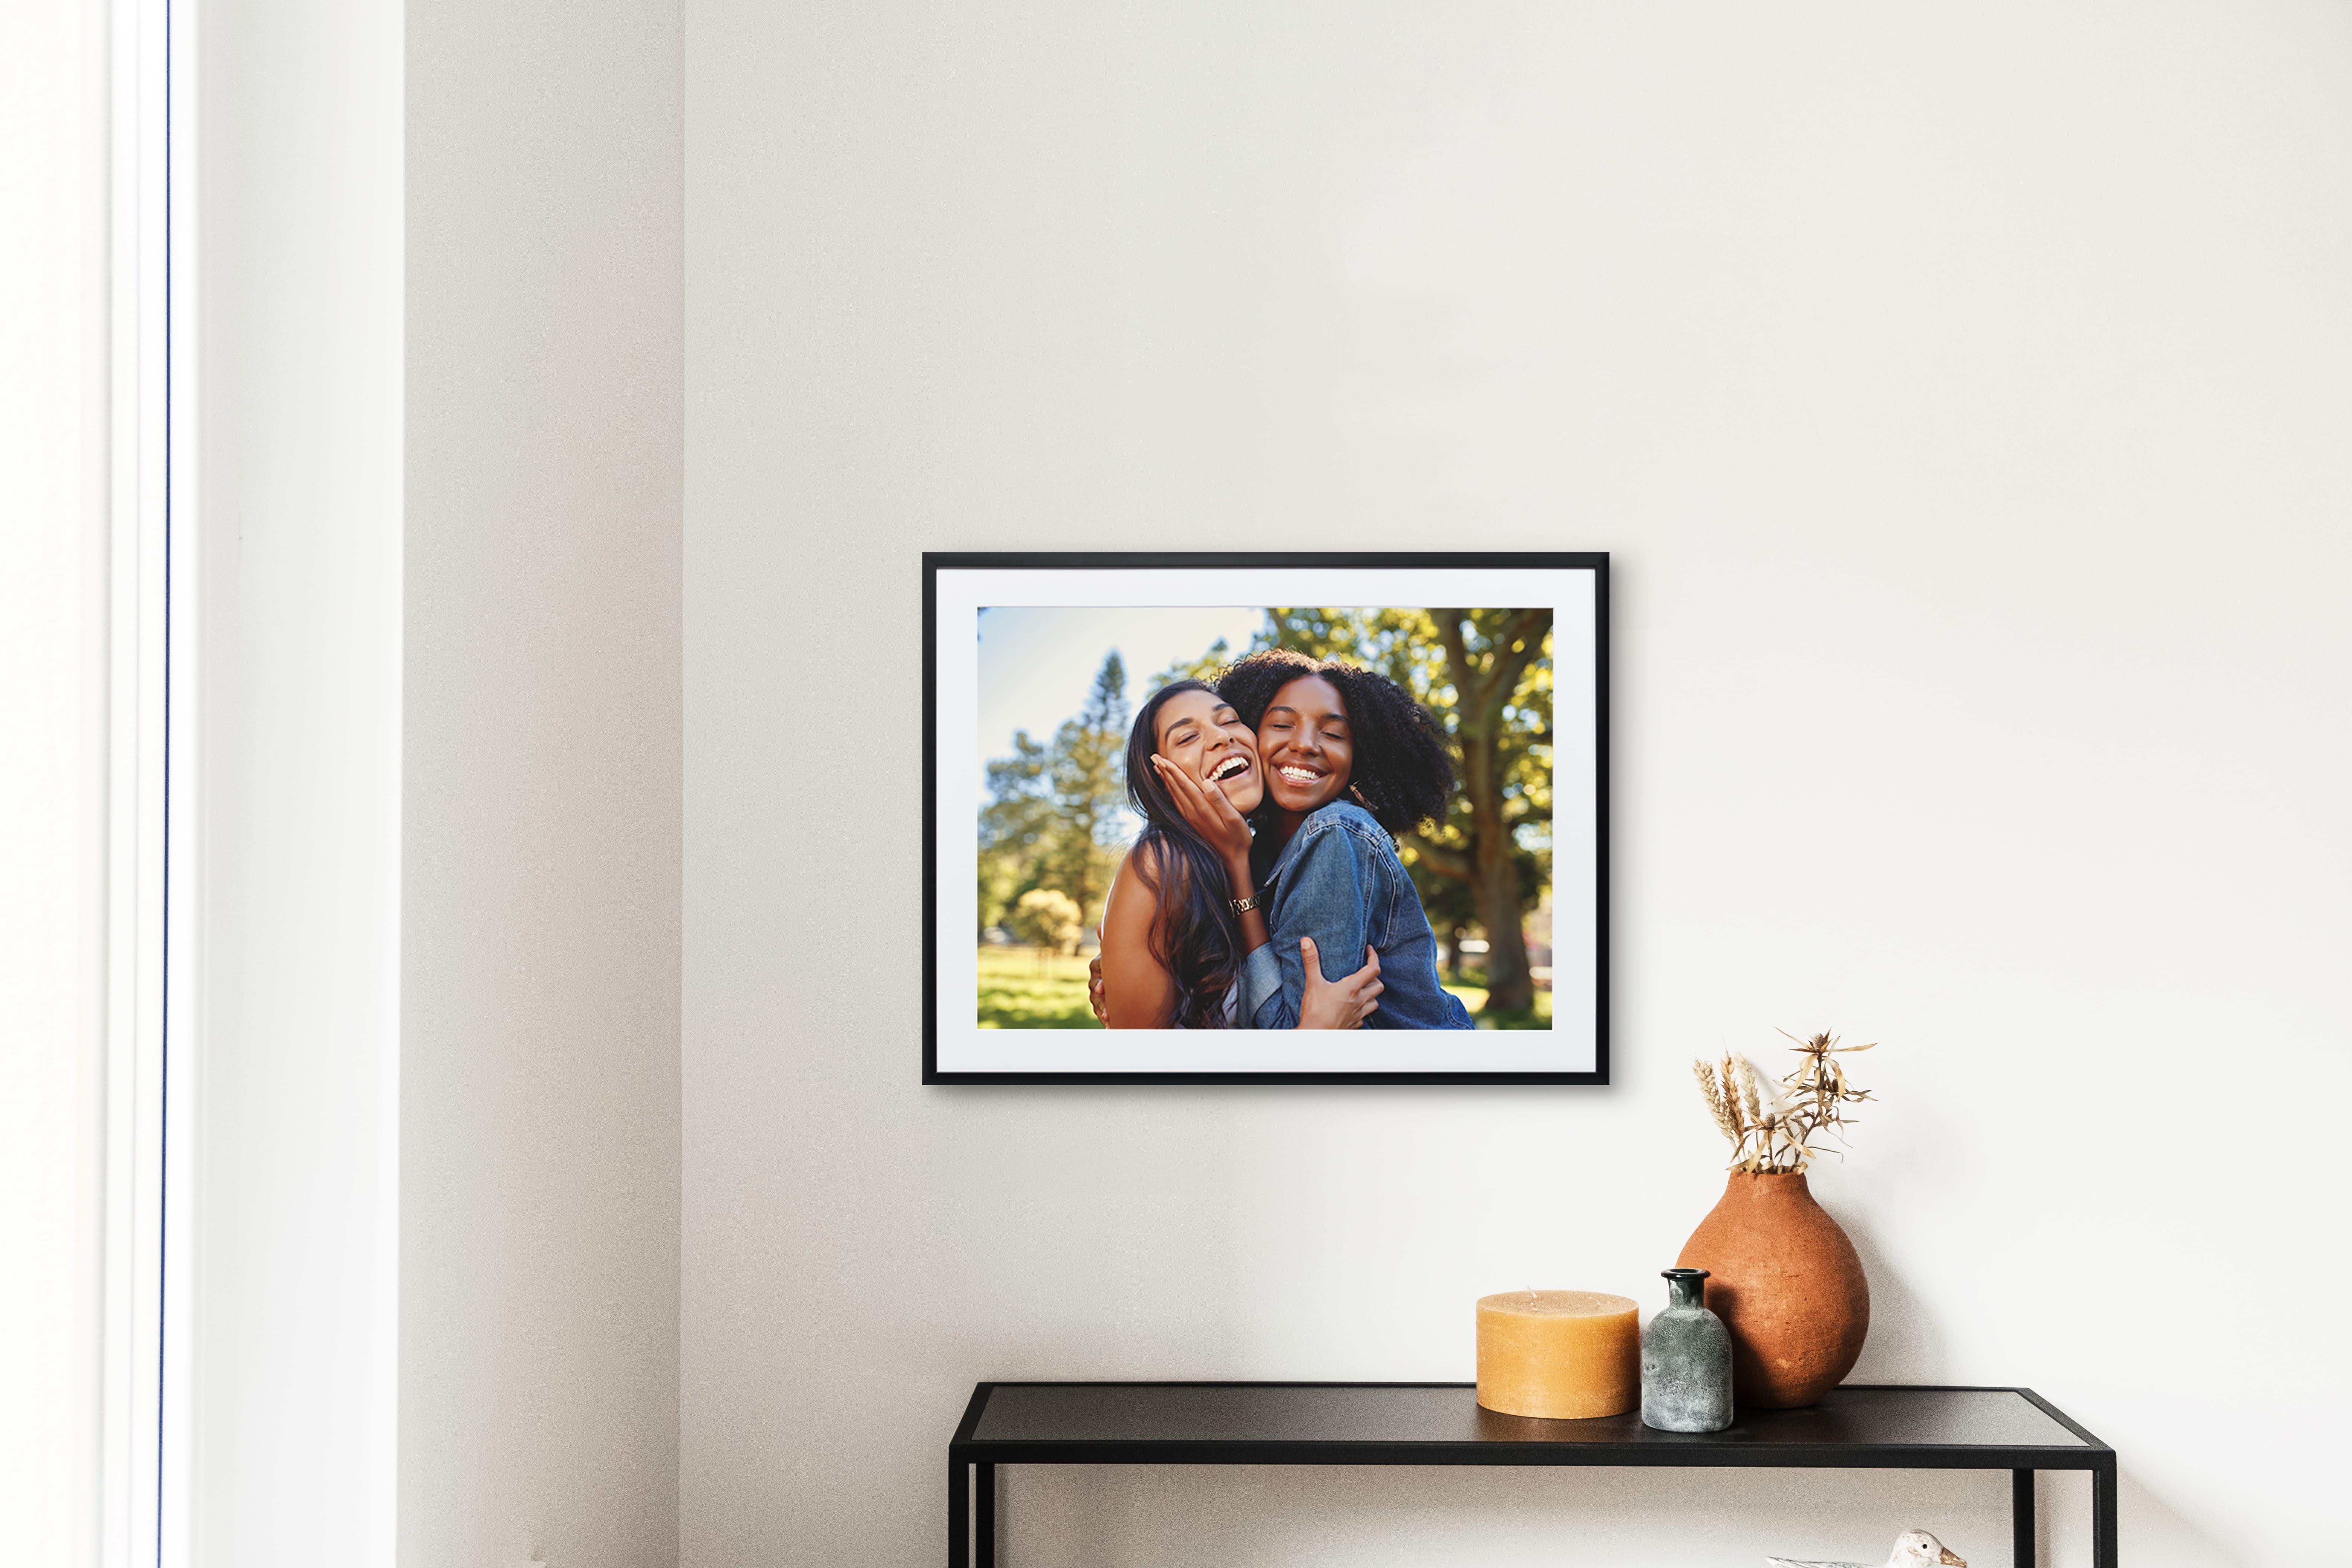 Framed print of two friends.